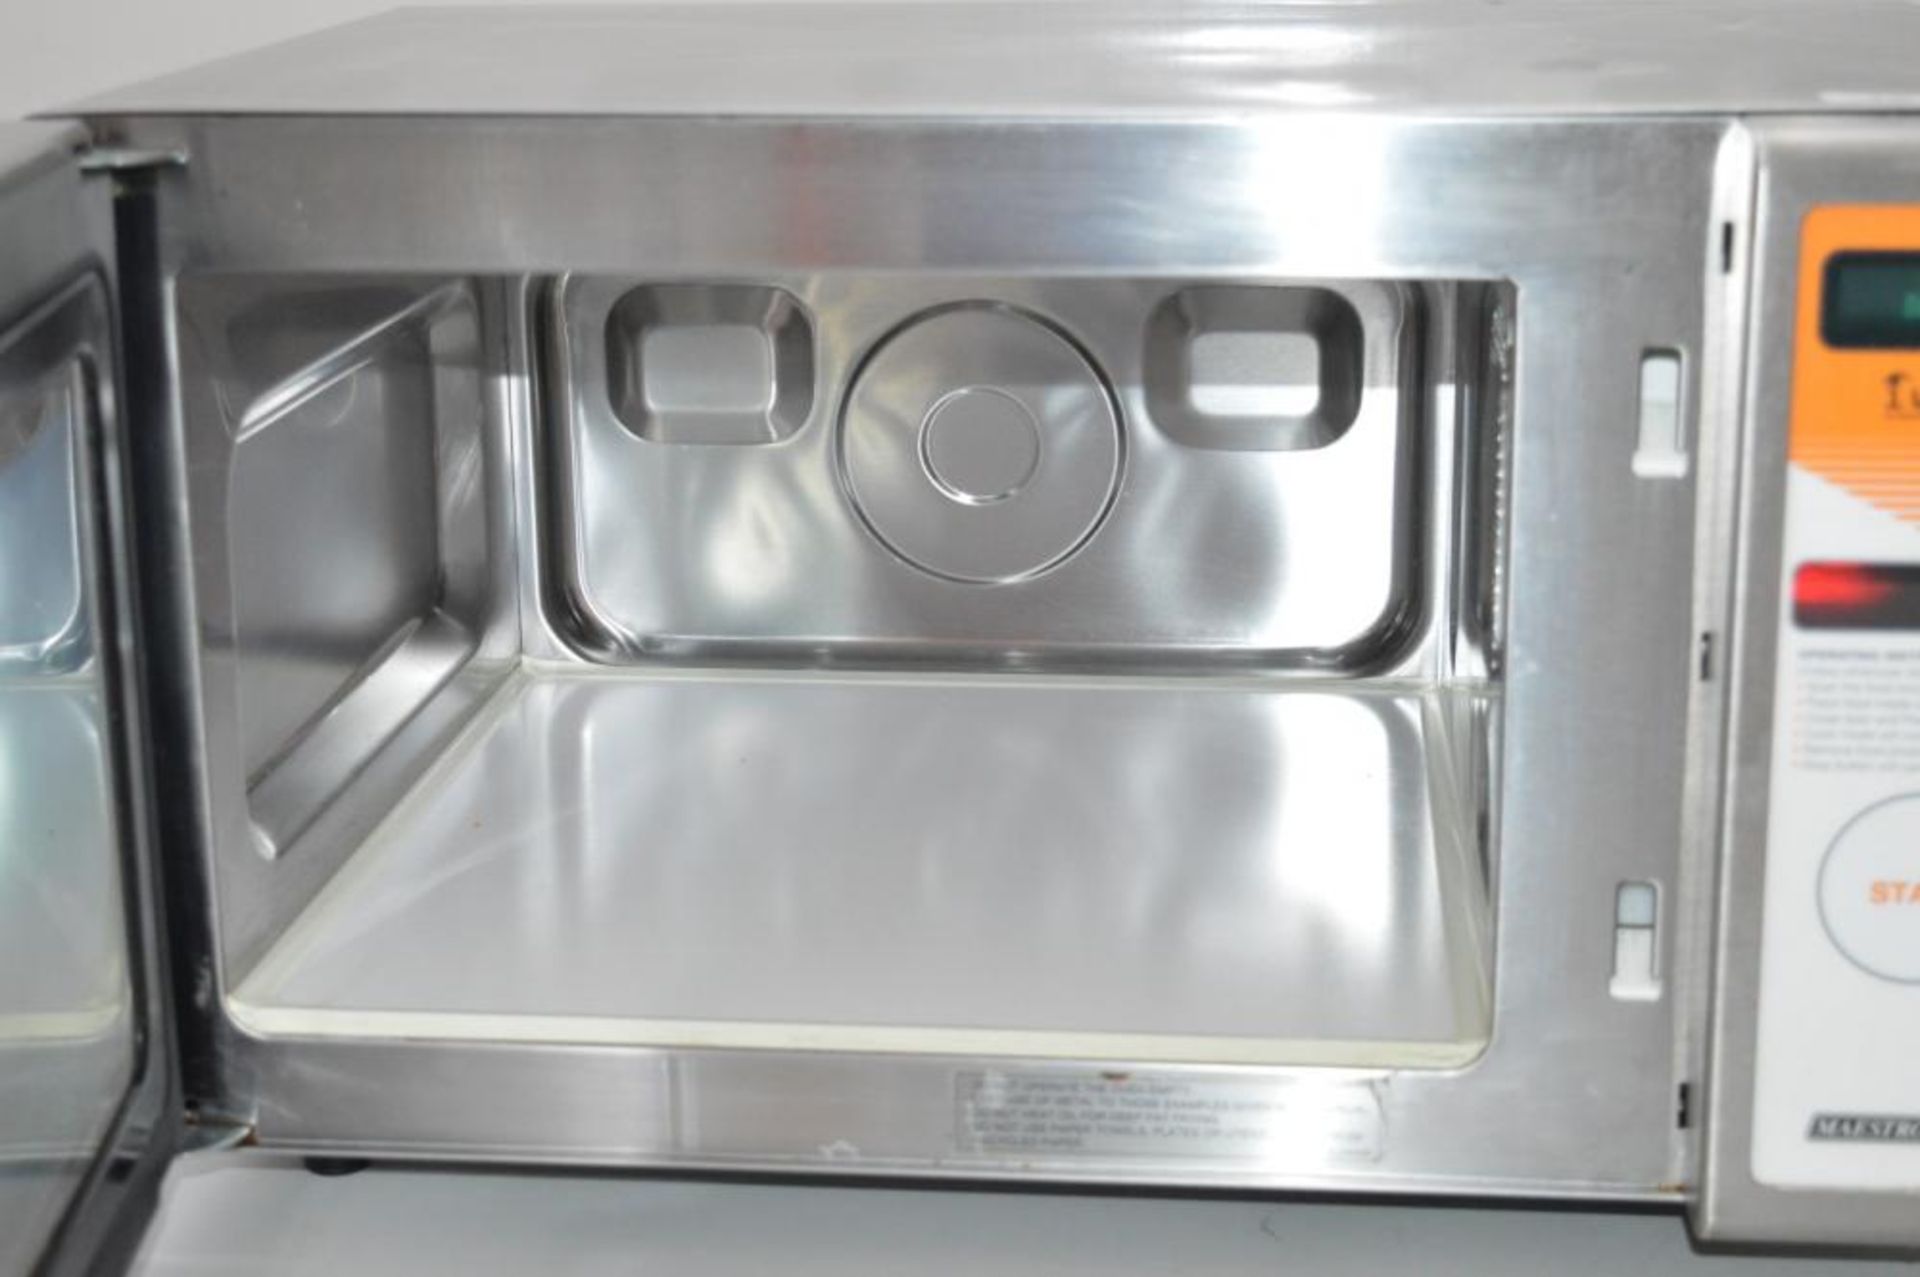 1 x iWave MiWAVE1000 Automated Foodservice Solution - Stainless Steel 1000w Catering Microwave - Image 9 of 14